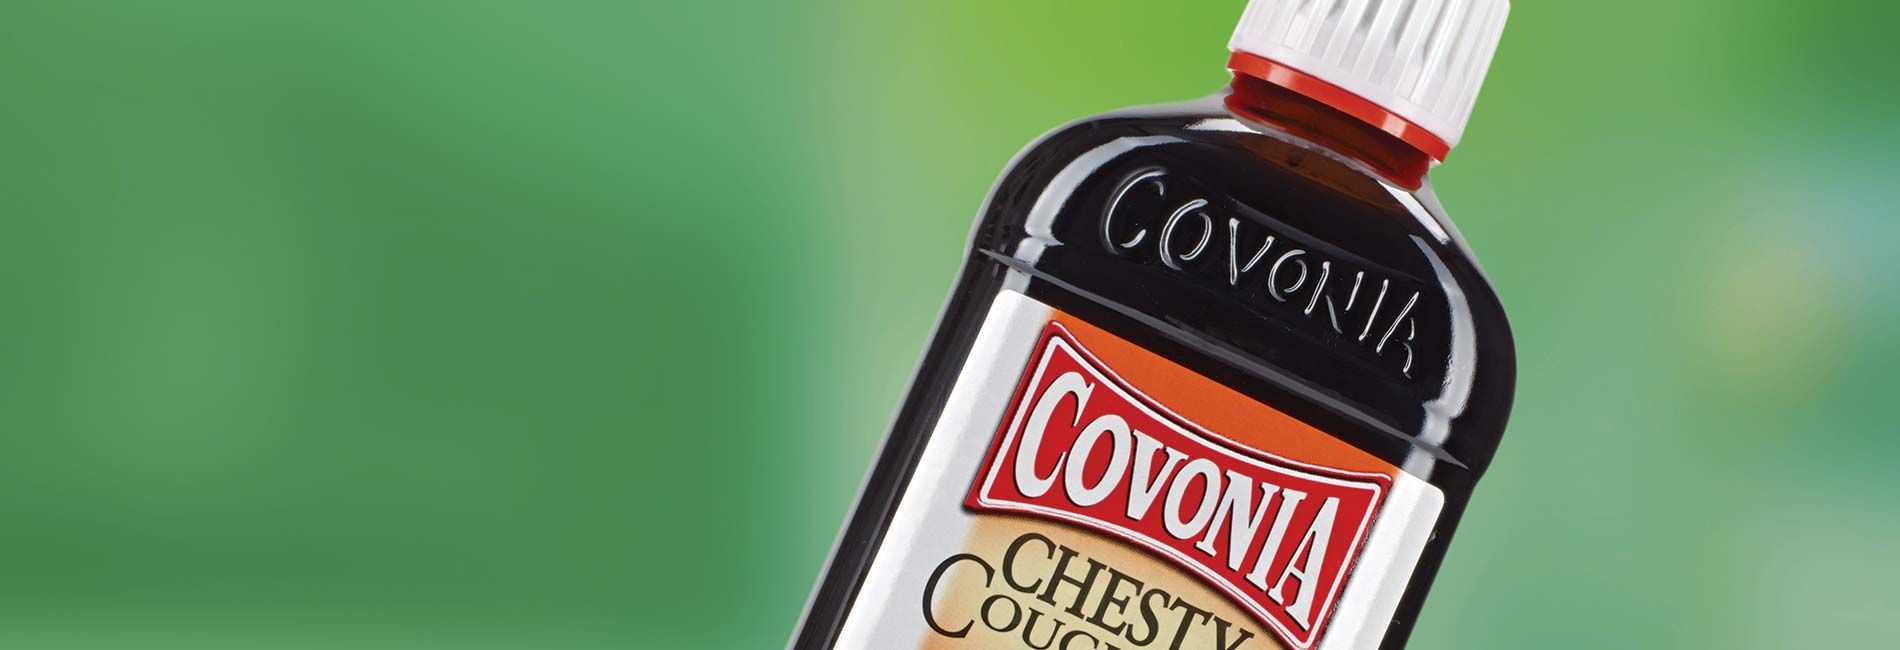 Covonia bottle